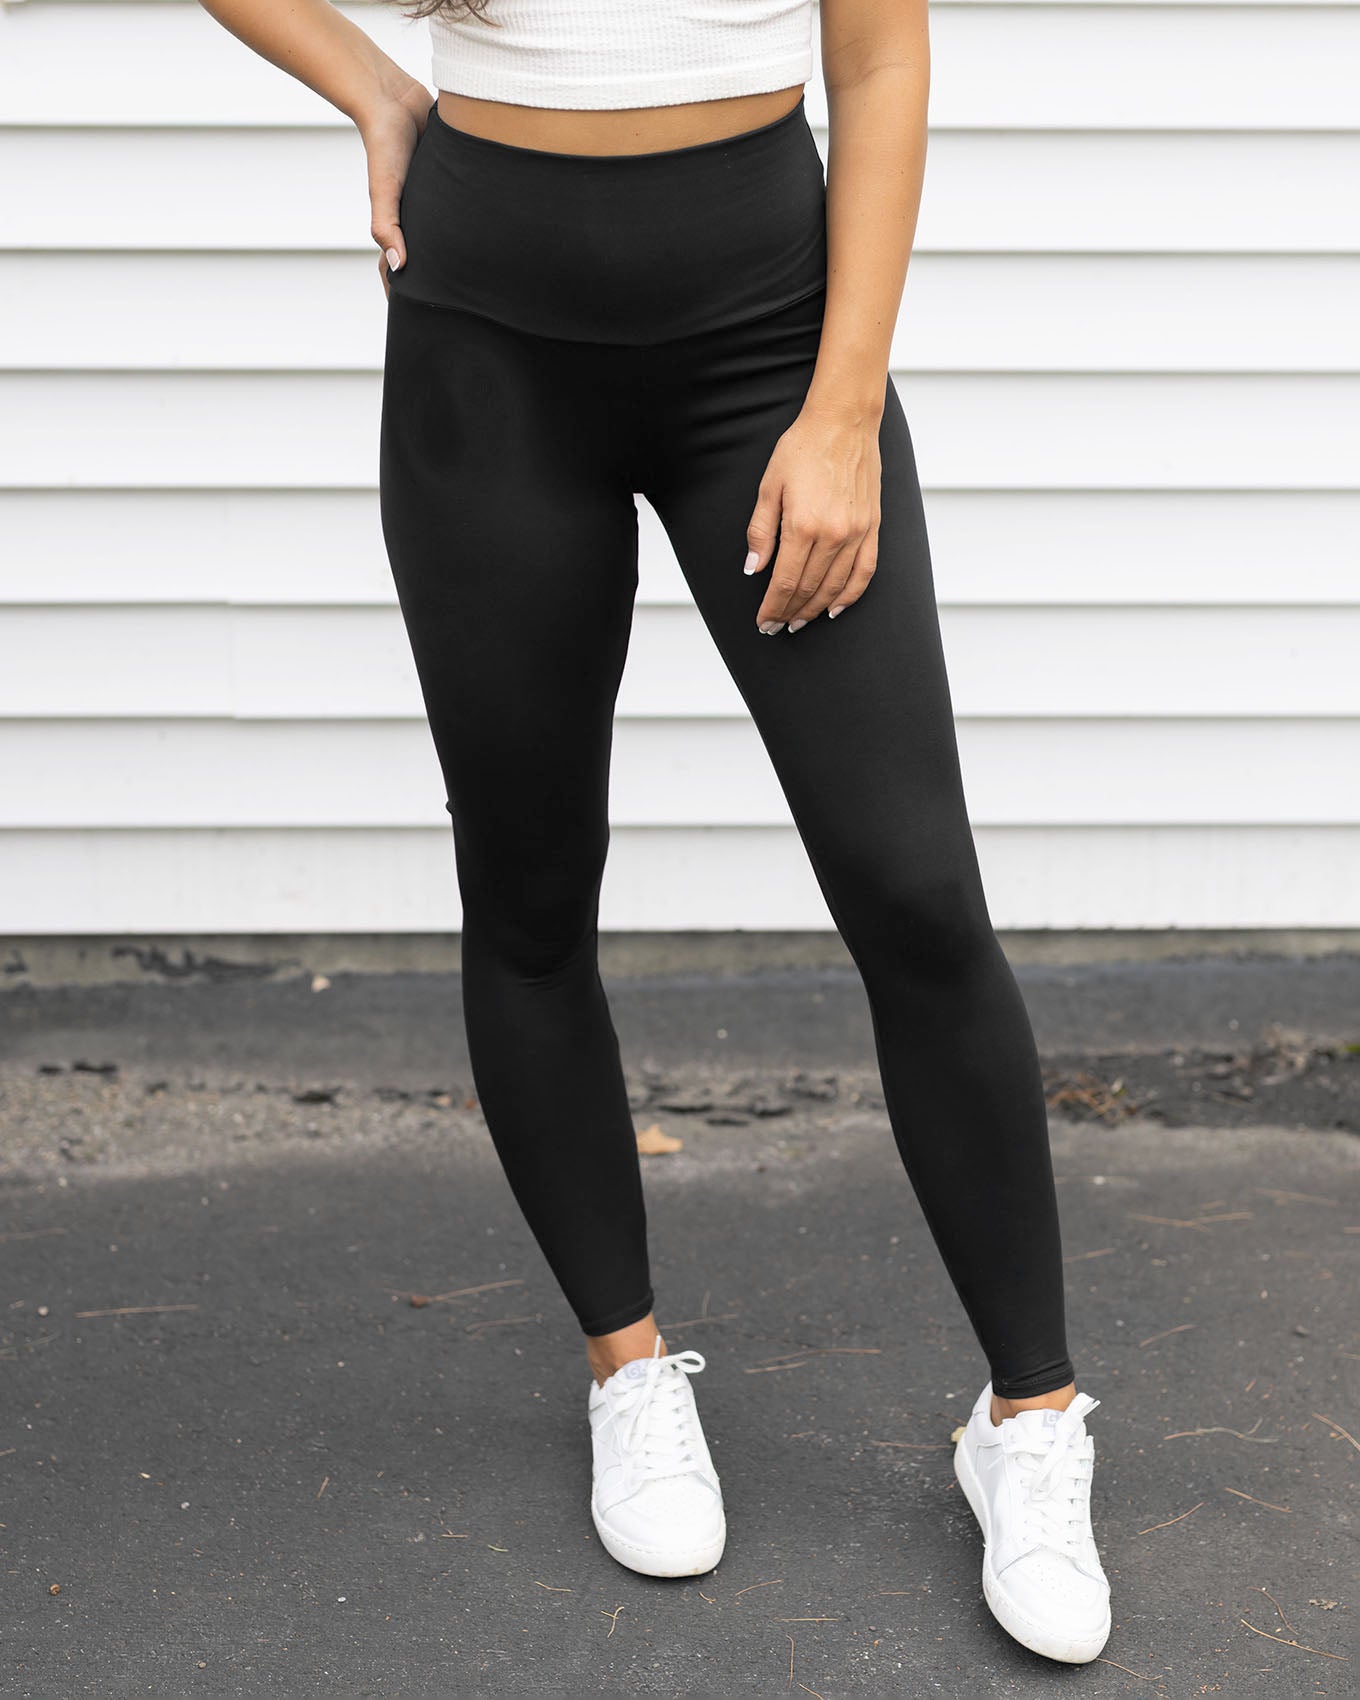 Black High Waisted Leggings Squat Proof in a Fabric That is